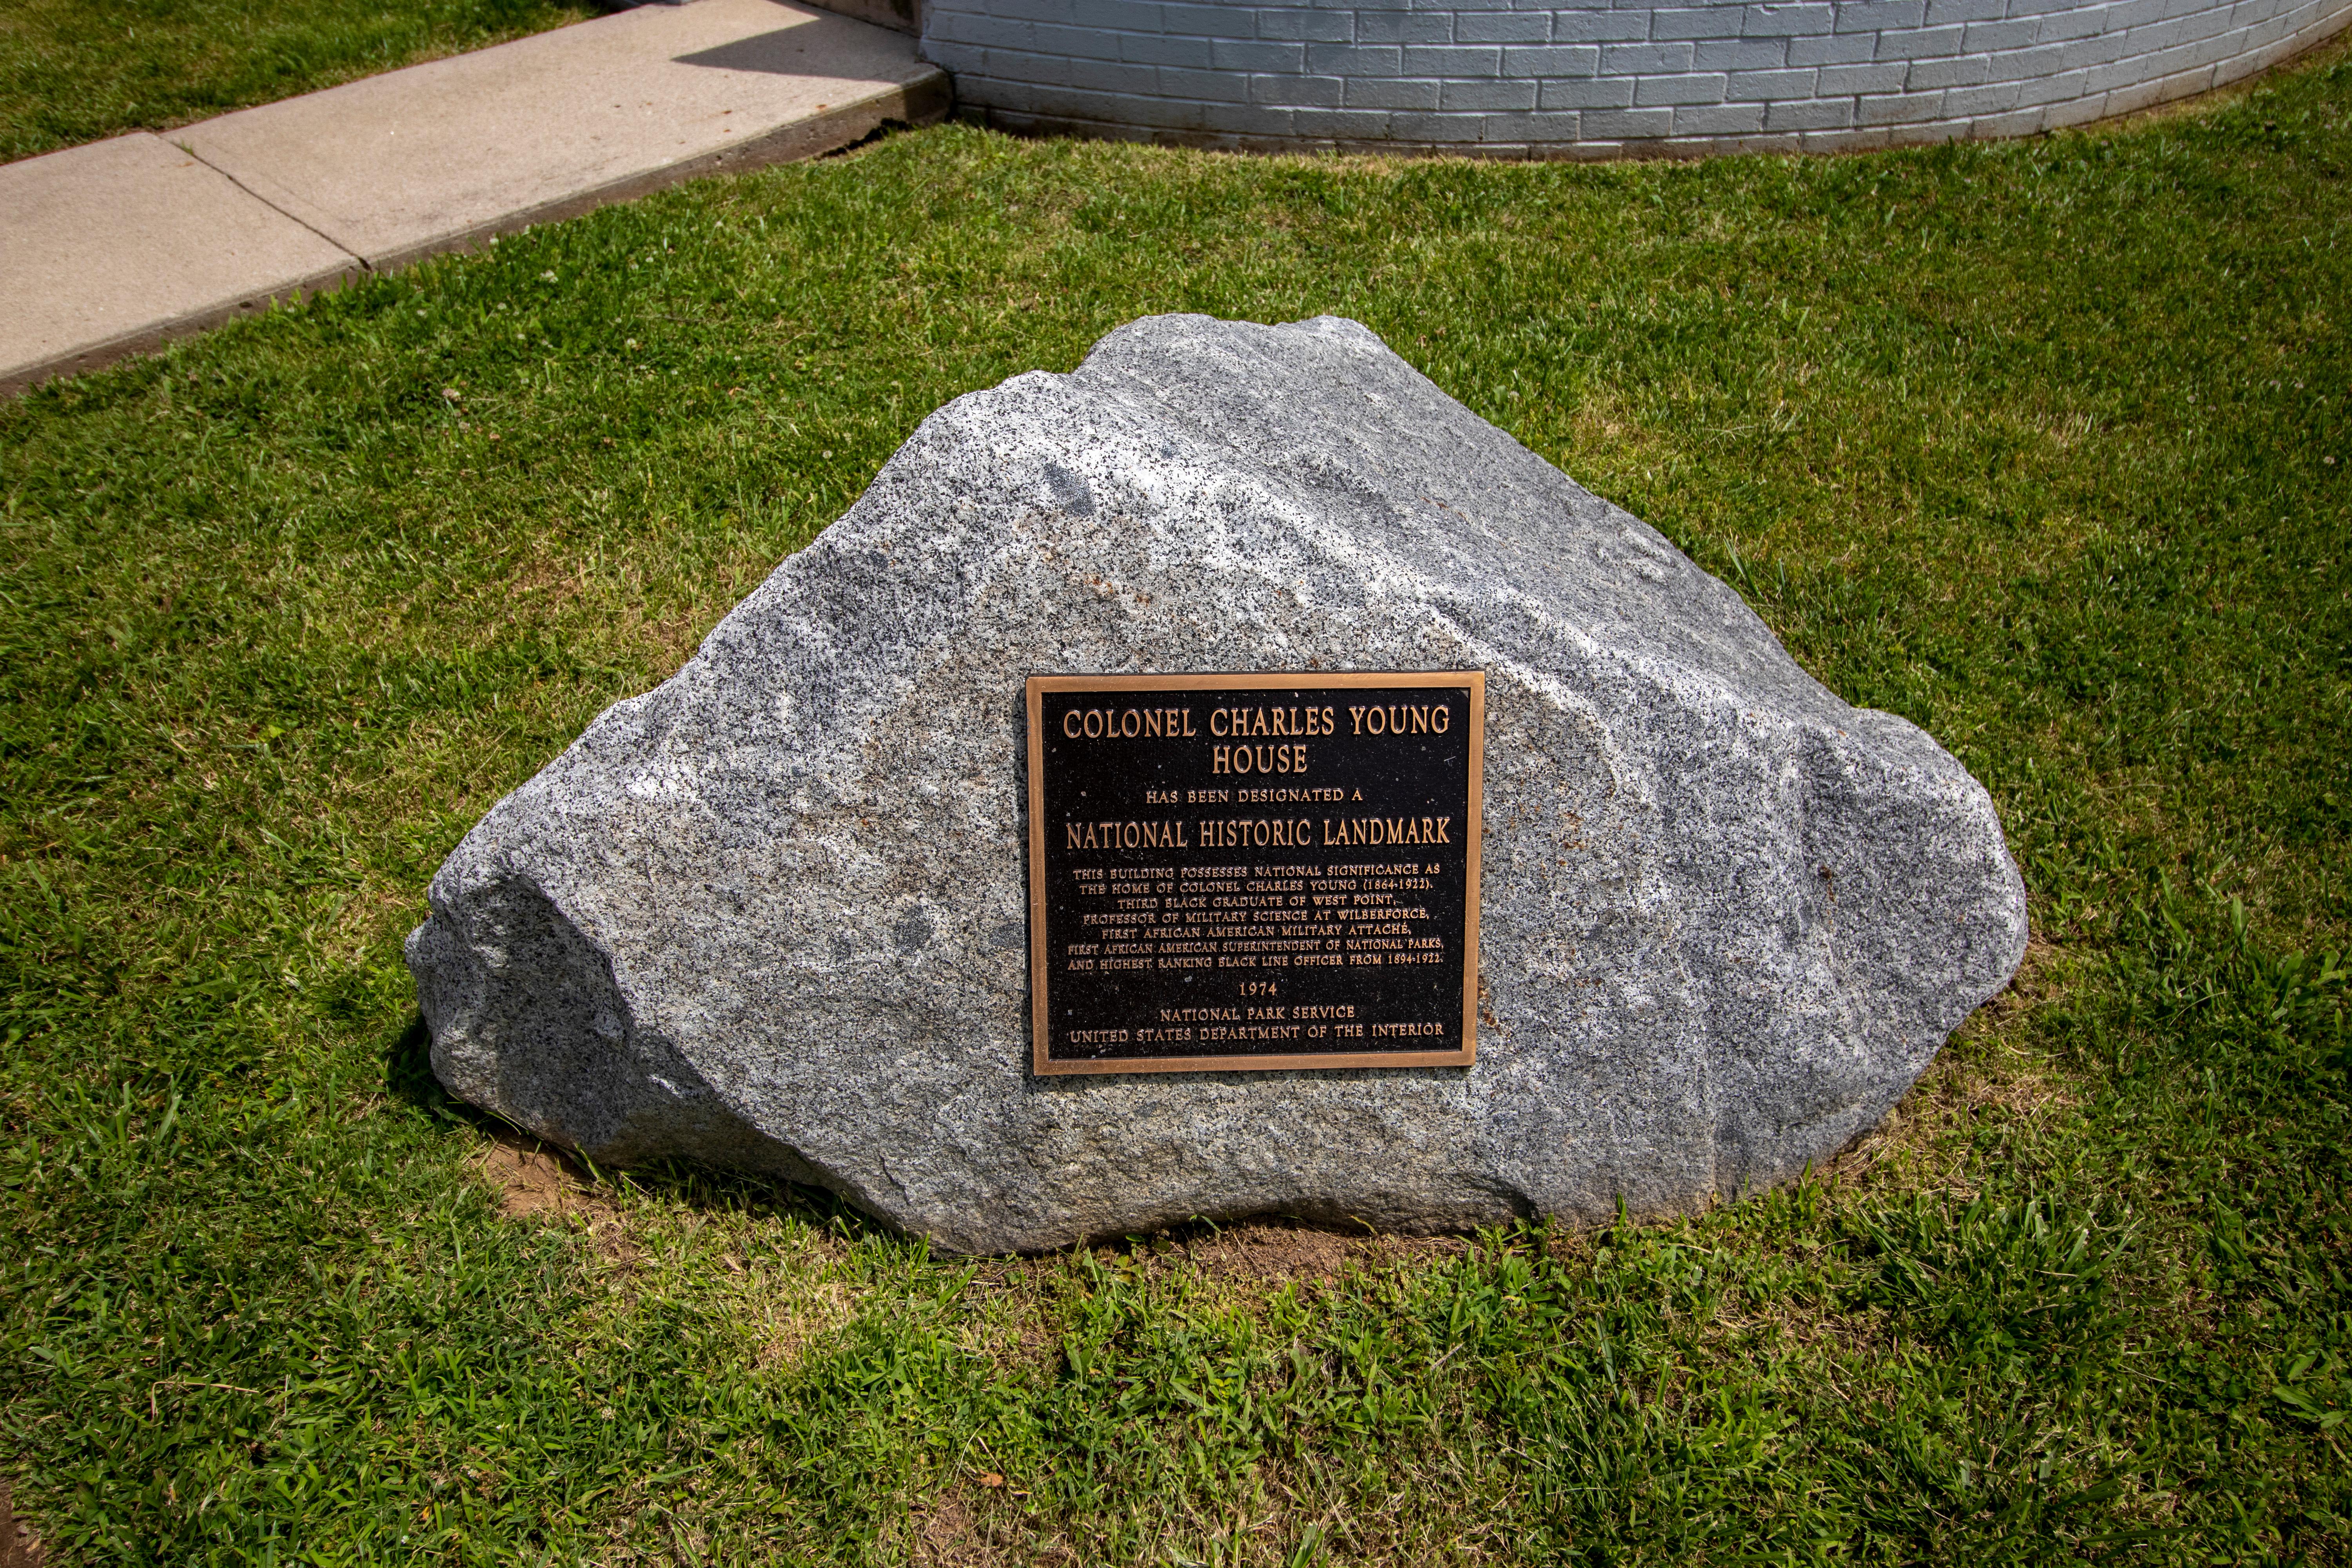 A large gray stone boulder with a bronze plaque on it indicating a national historical landmark